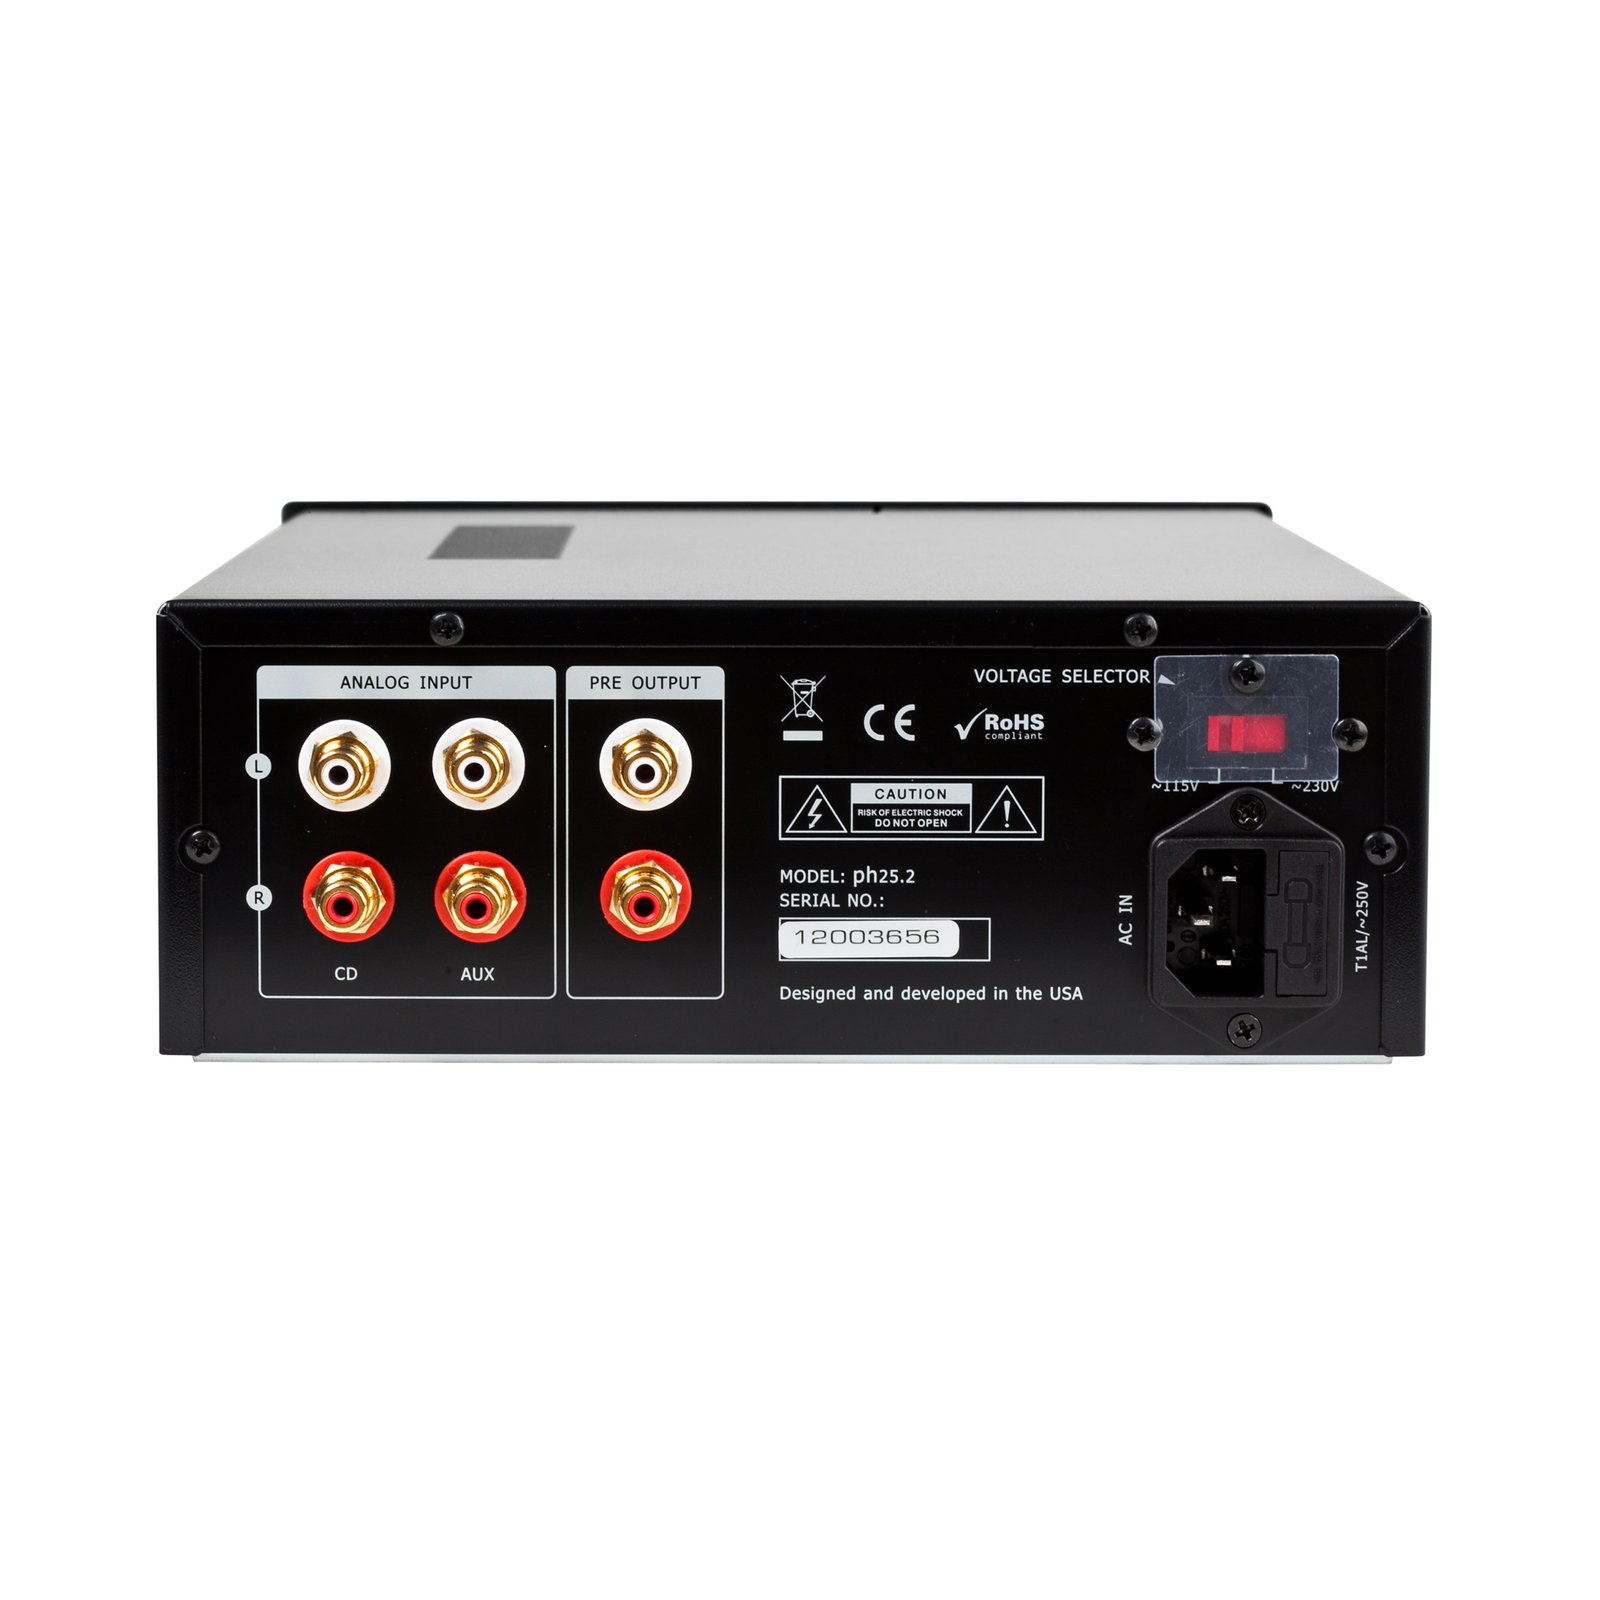 Product Highlights: Neutrik headphone output sockets Reliable 6N16B tube pre-amp section with SRPP circuit CD and AUX input Pre-amp output Audiophile grade CMC RCA sockets Low-noise R-core power transformer Two buffered headphone outputs with TPA6120 opamps Alps Type 27 potentiometer with 0.5dB accuracy Brushed alloy fascia Voltage switchable